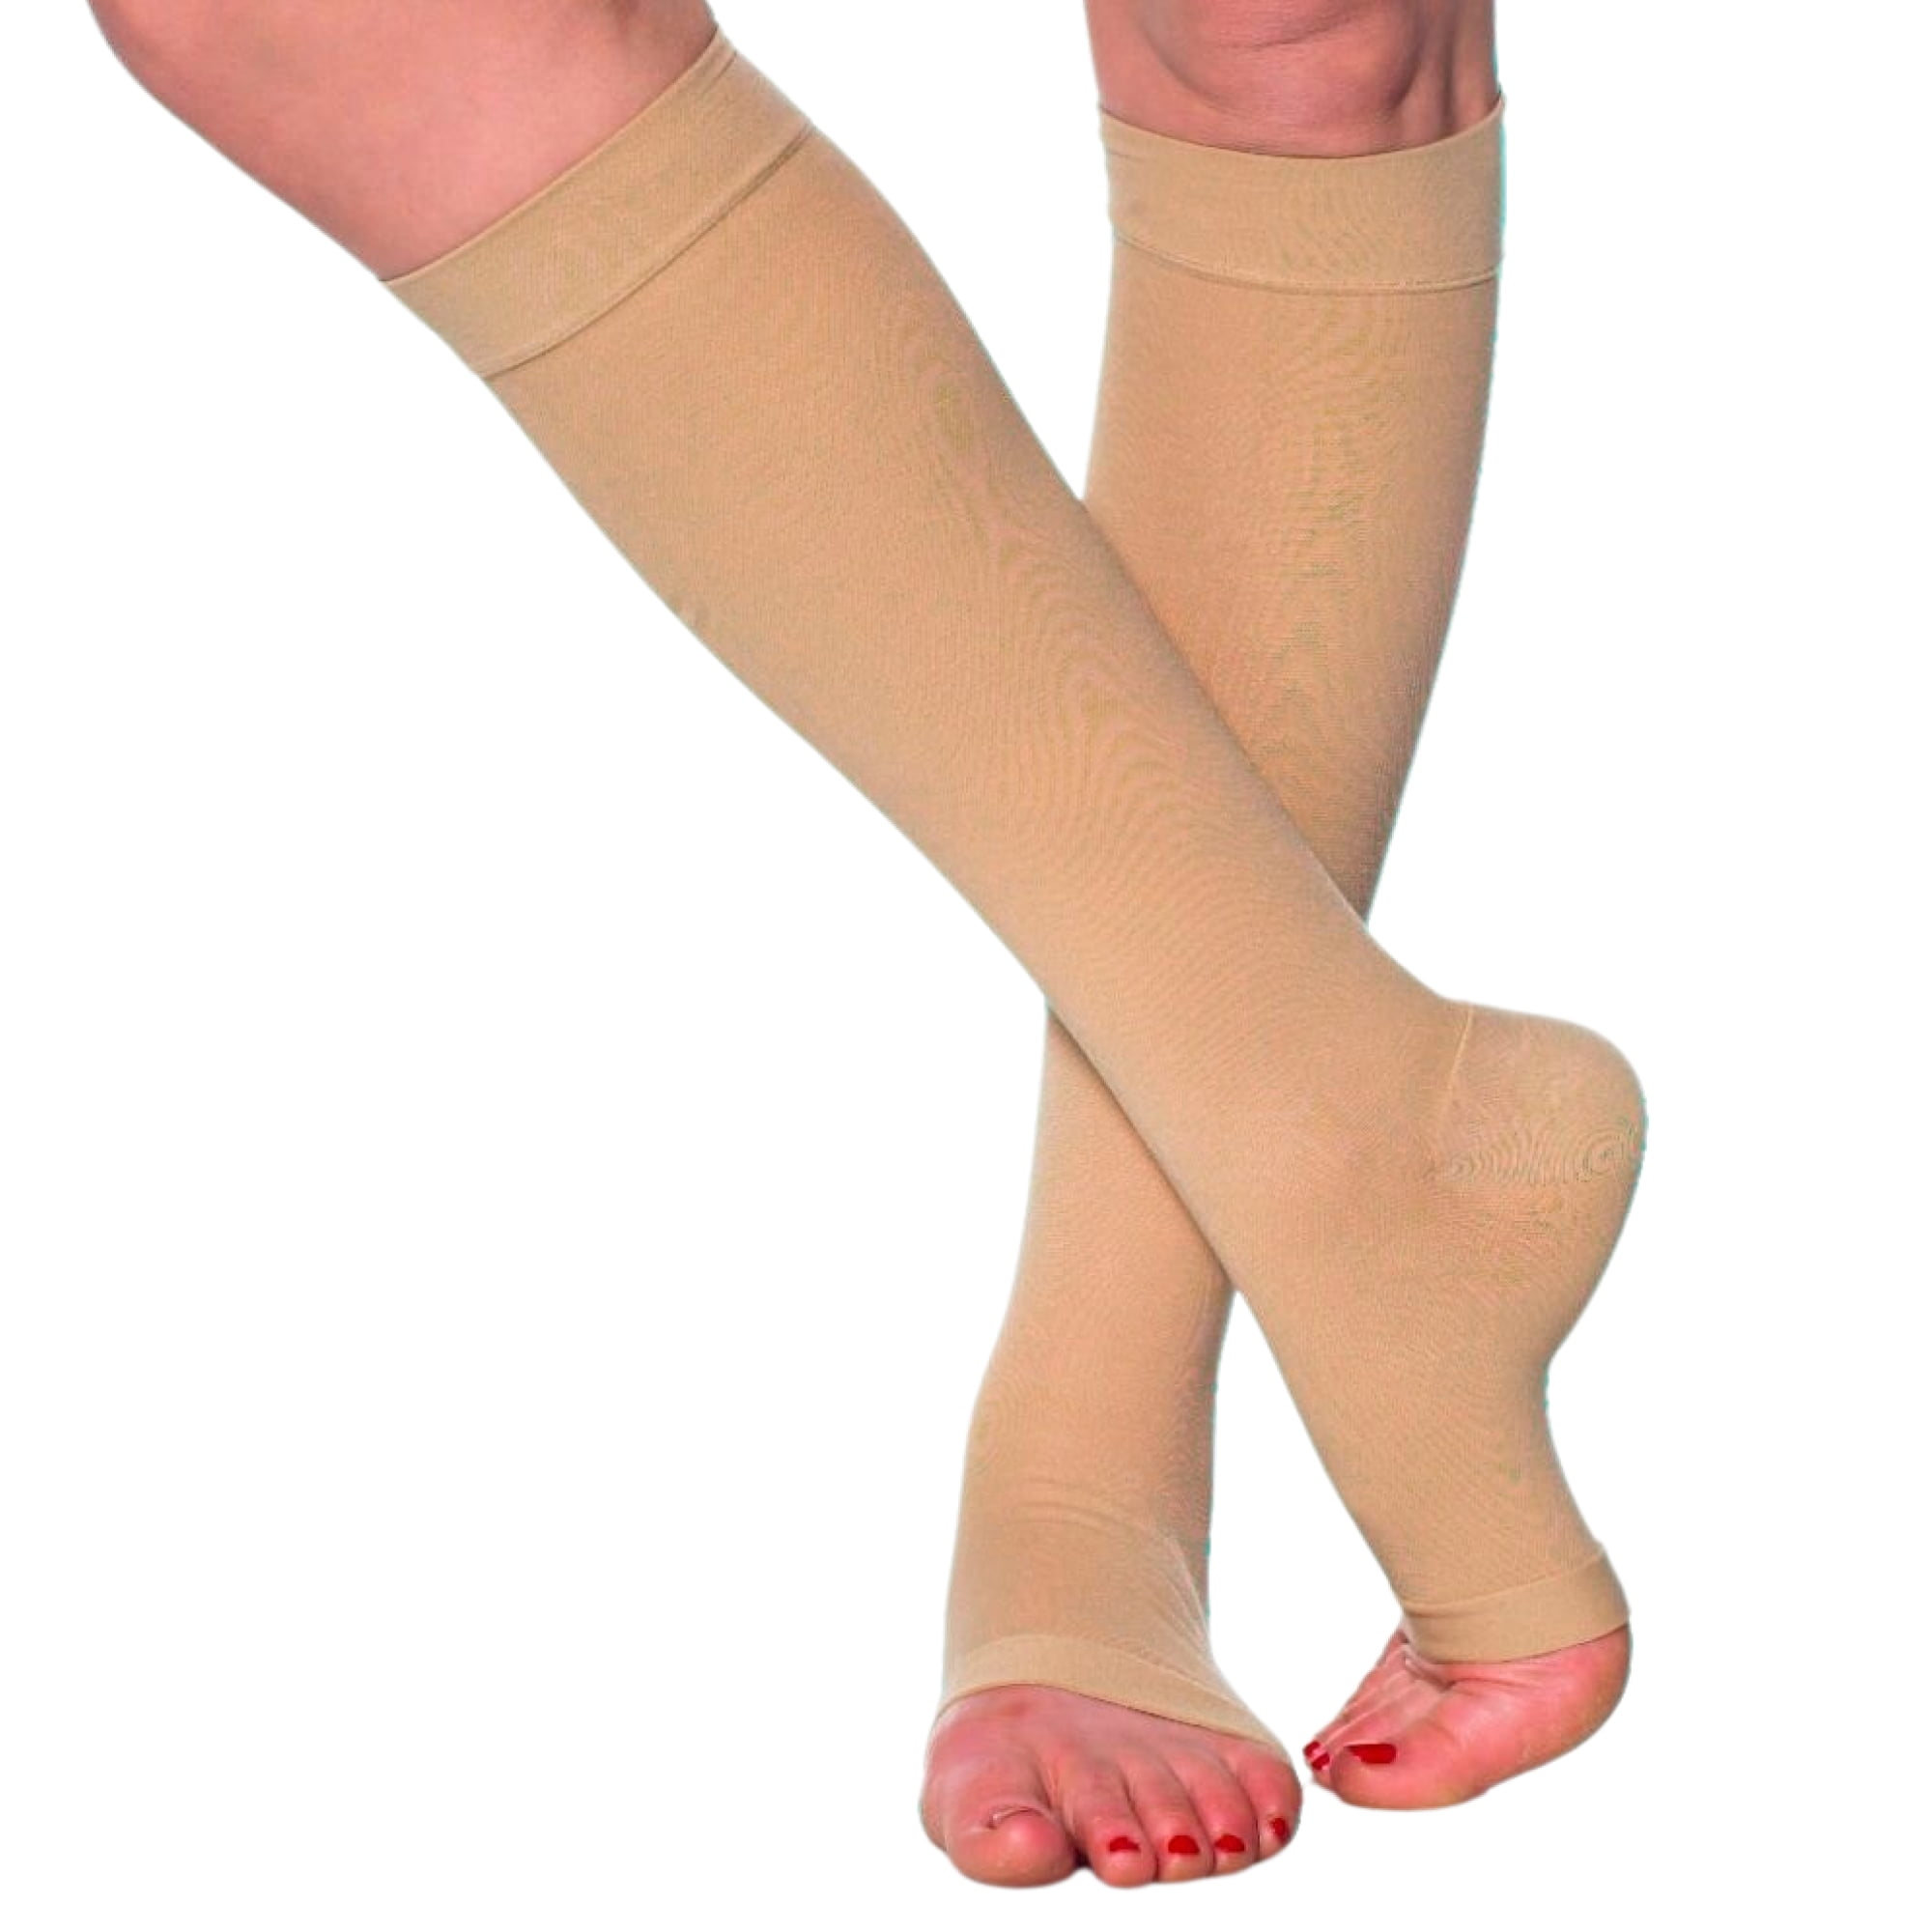 2XL Unisex Compression Stockings for Diabetic and Edema 20-30mmHg - Beige,  2XL 